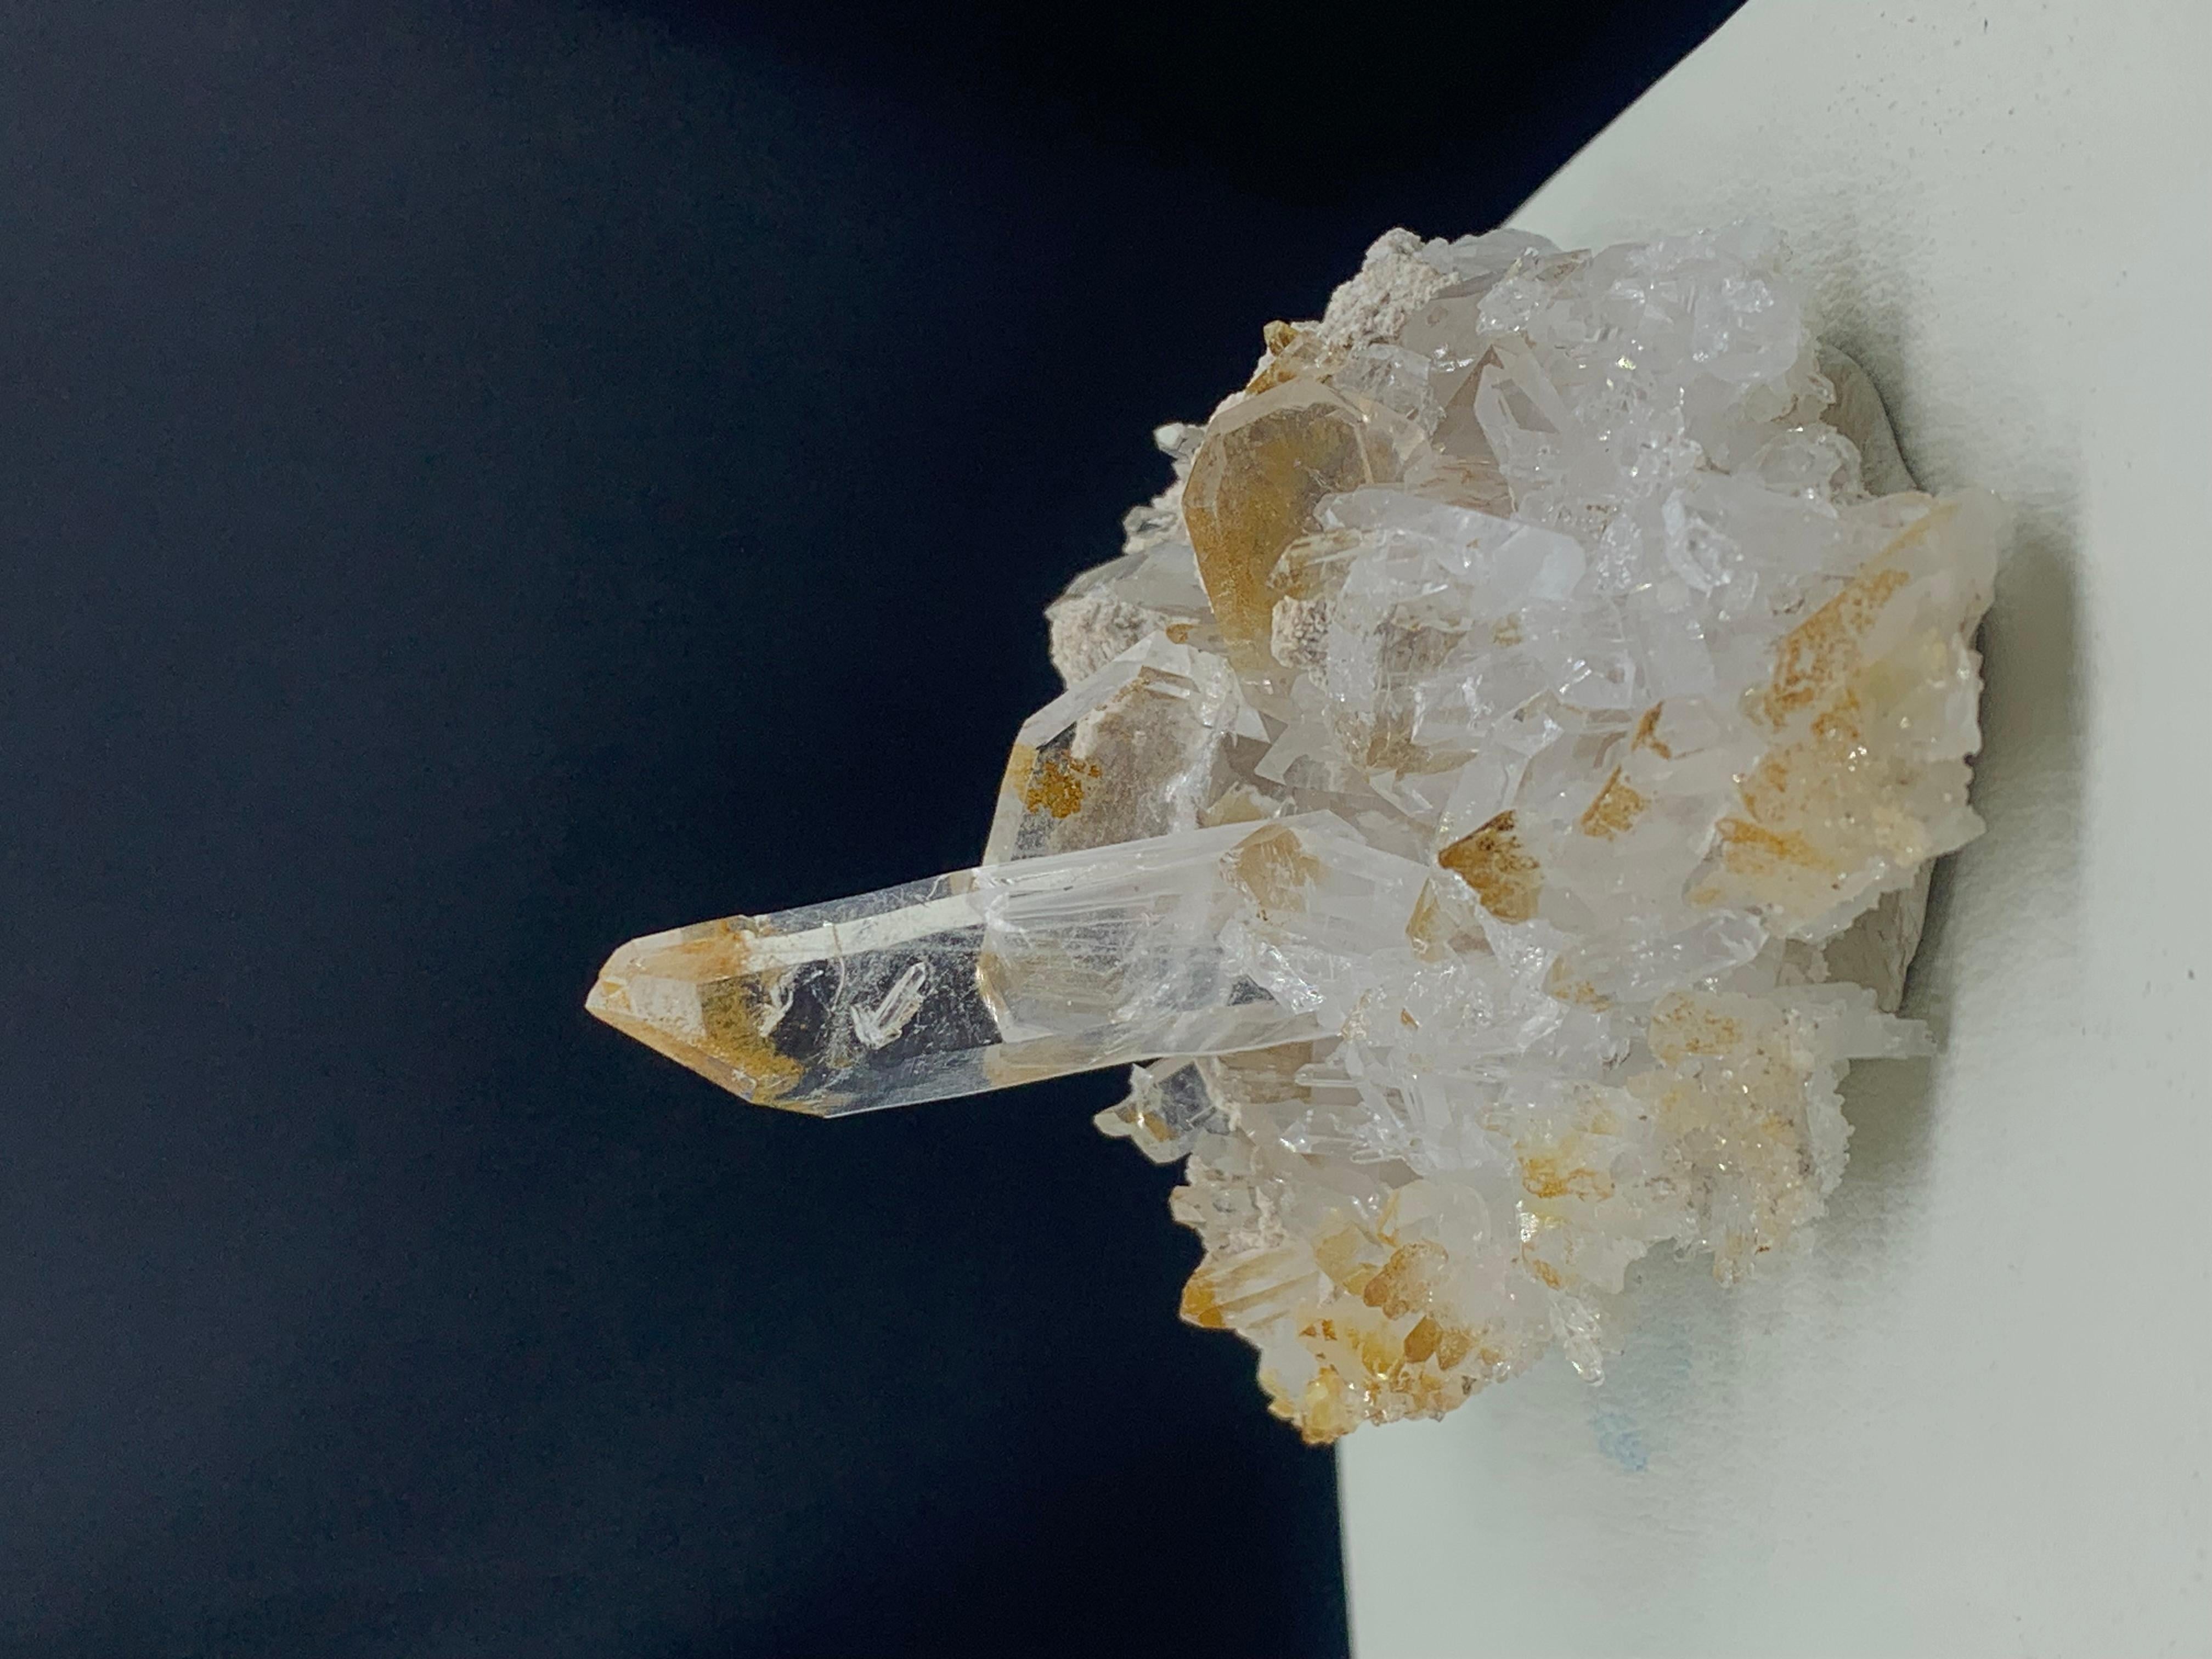 Gorgeous Natural Faden Quartz Cluster Specimen from Balochistan Pakistan Mine
WEIGHT : 73.30 grams
DIMENSIONS : 5.4 x 5.6 x 6.3 x CM
ORIGIN : Balochistan, Pakistan
TREATMENT : None

Today quartz is used in many products as a raw material for huge